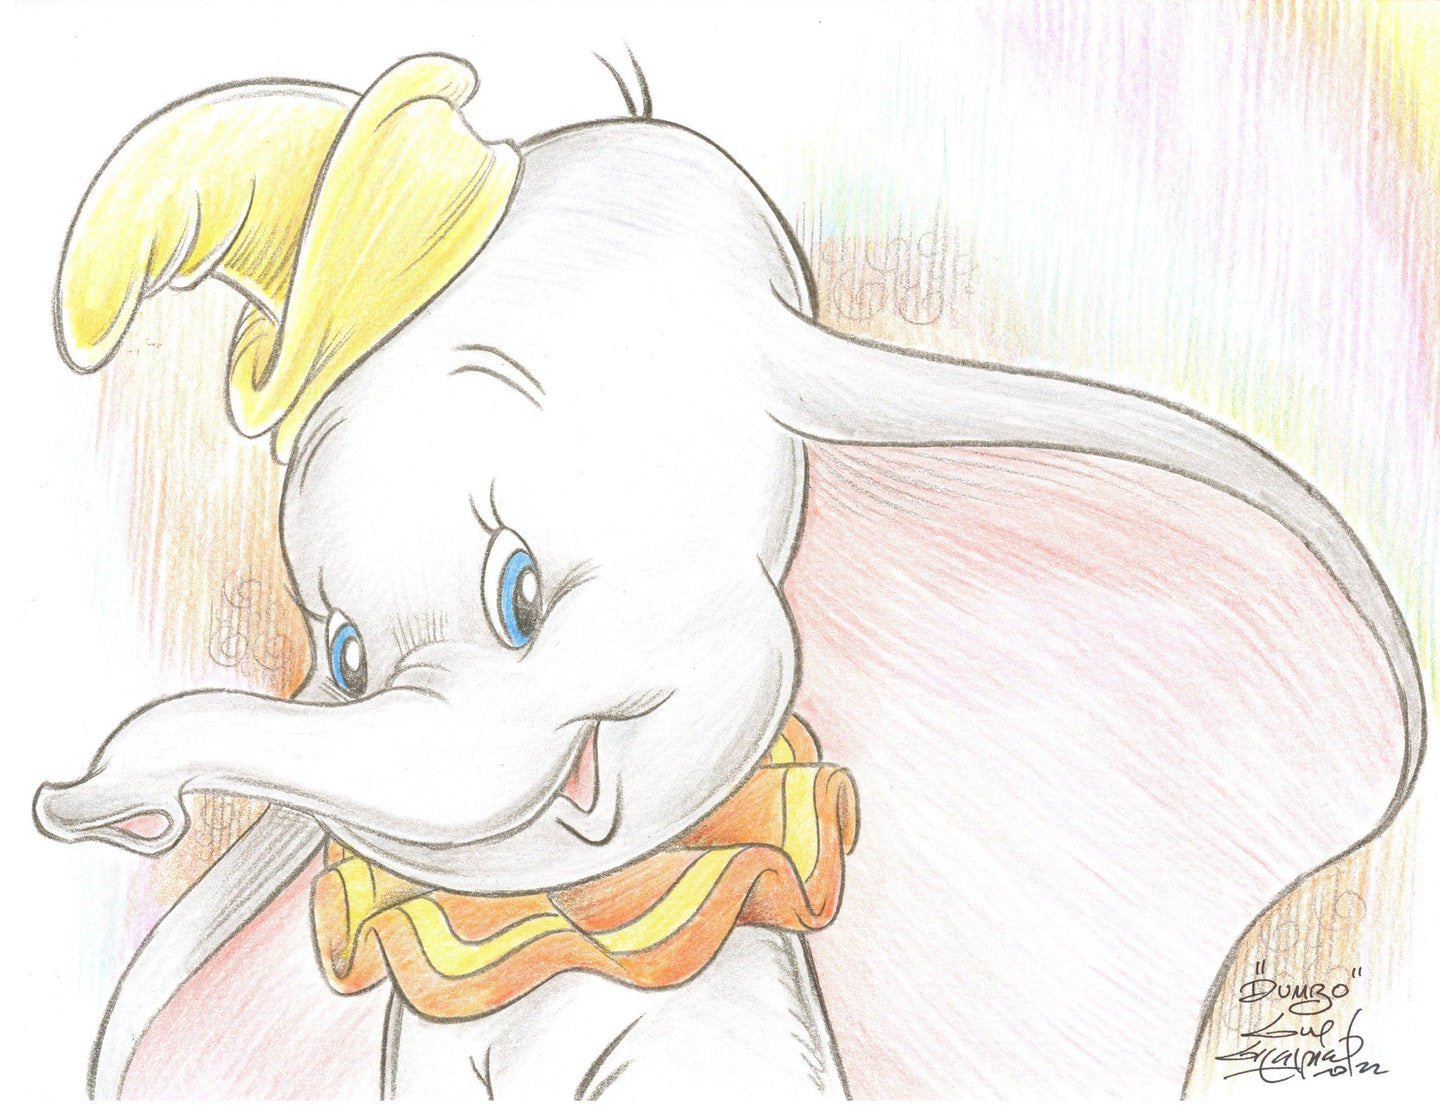 Disney's Dumbo Original Art 8.5x11 Sketch - Created by Guy Gilchrist